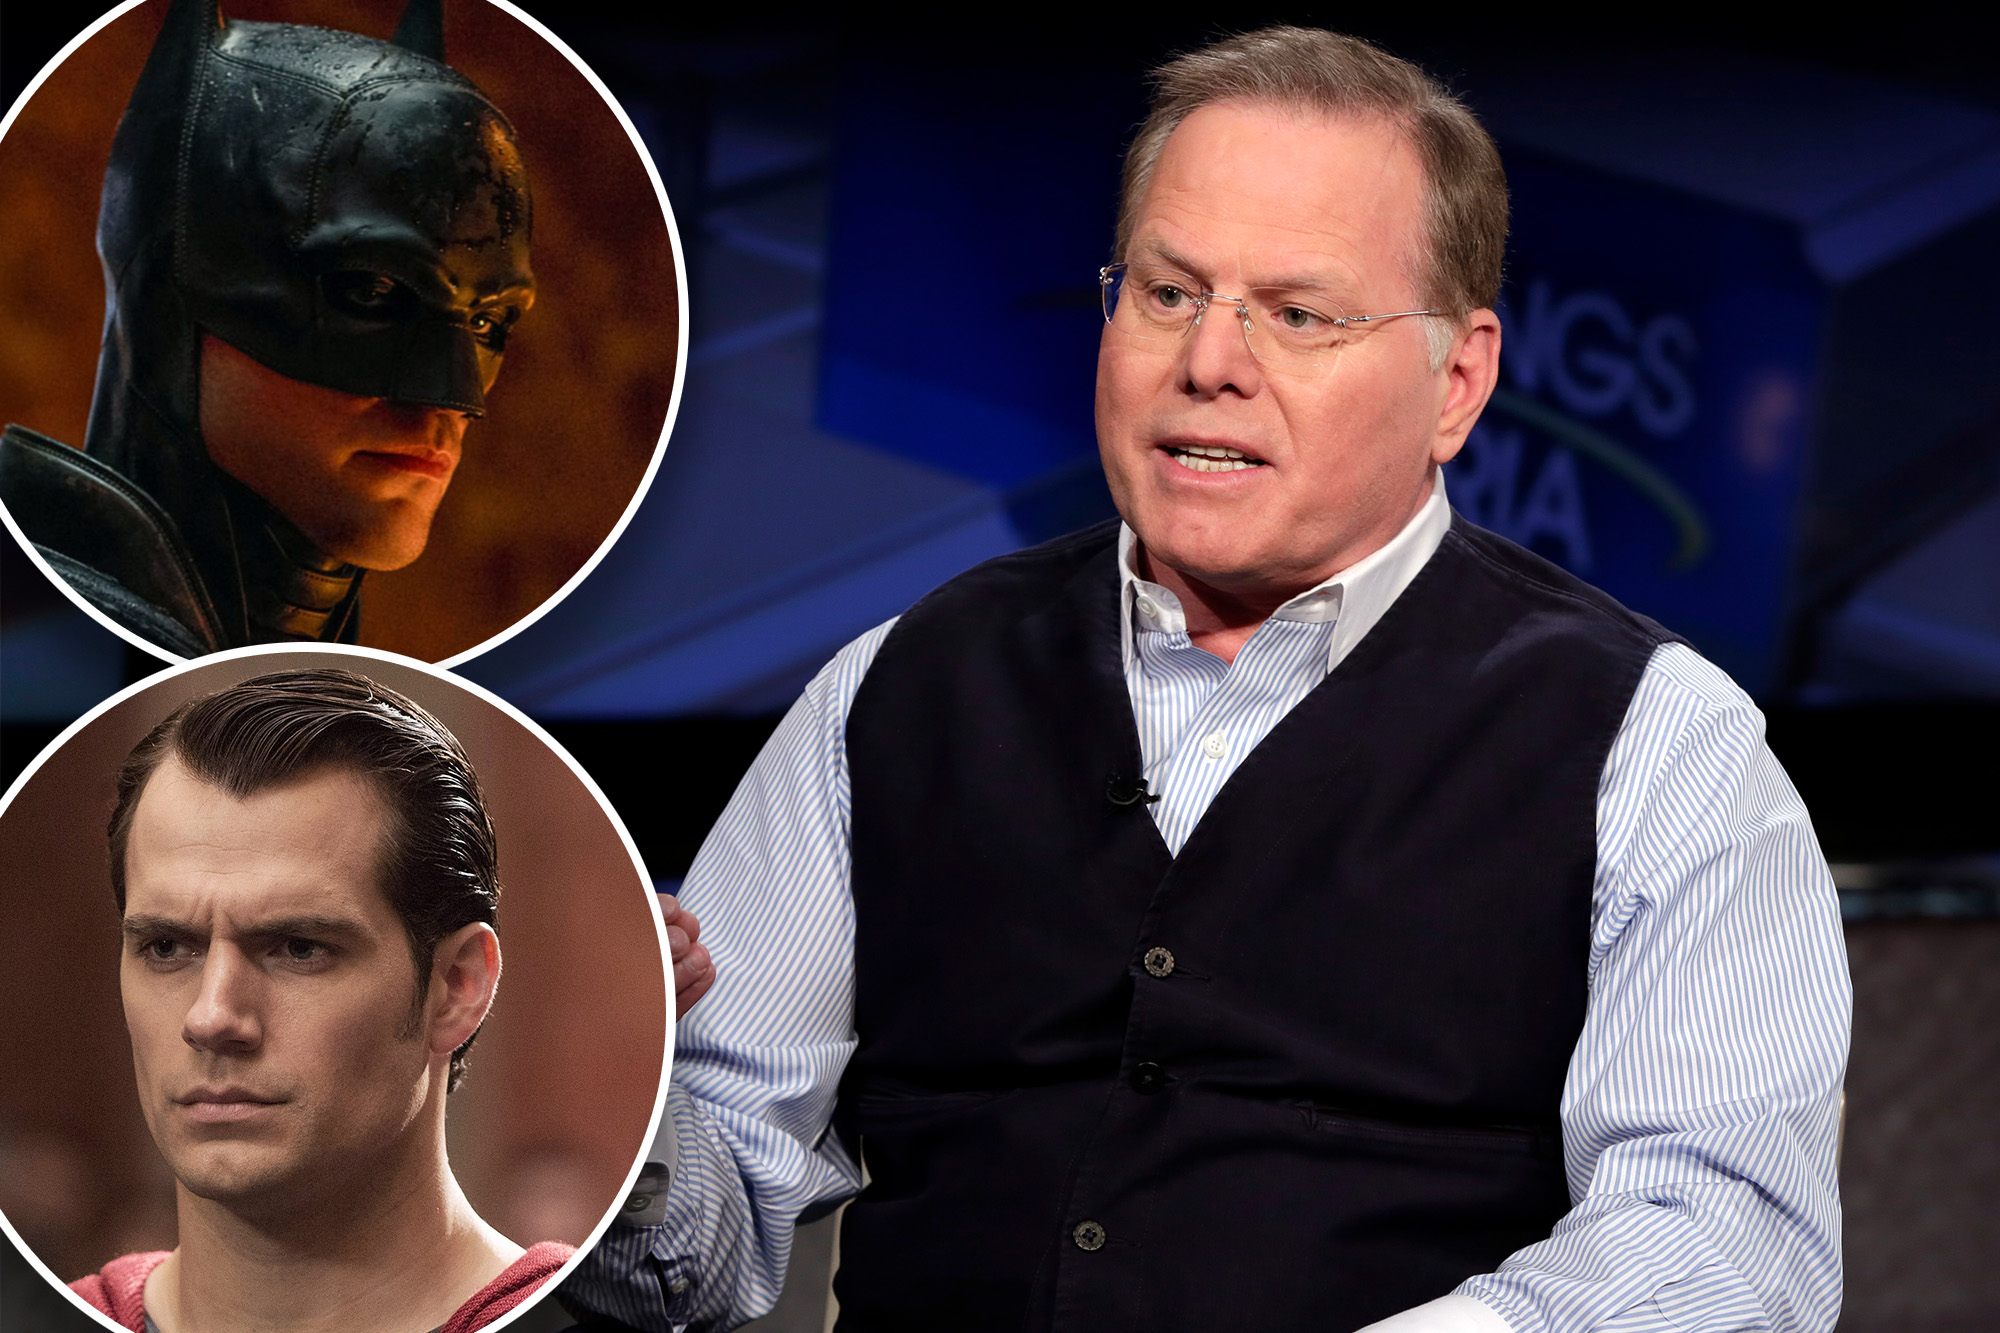 Warner Bros. Discovery CEO David Zaslav is betting that big theatrical releases of franchises such as "Batman" and "Superman" will help the company's bottom line.